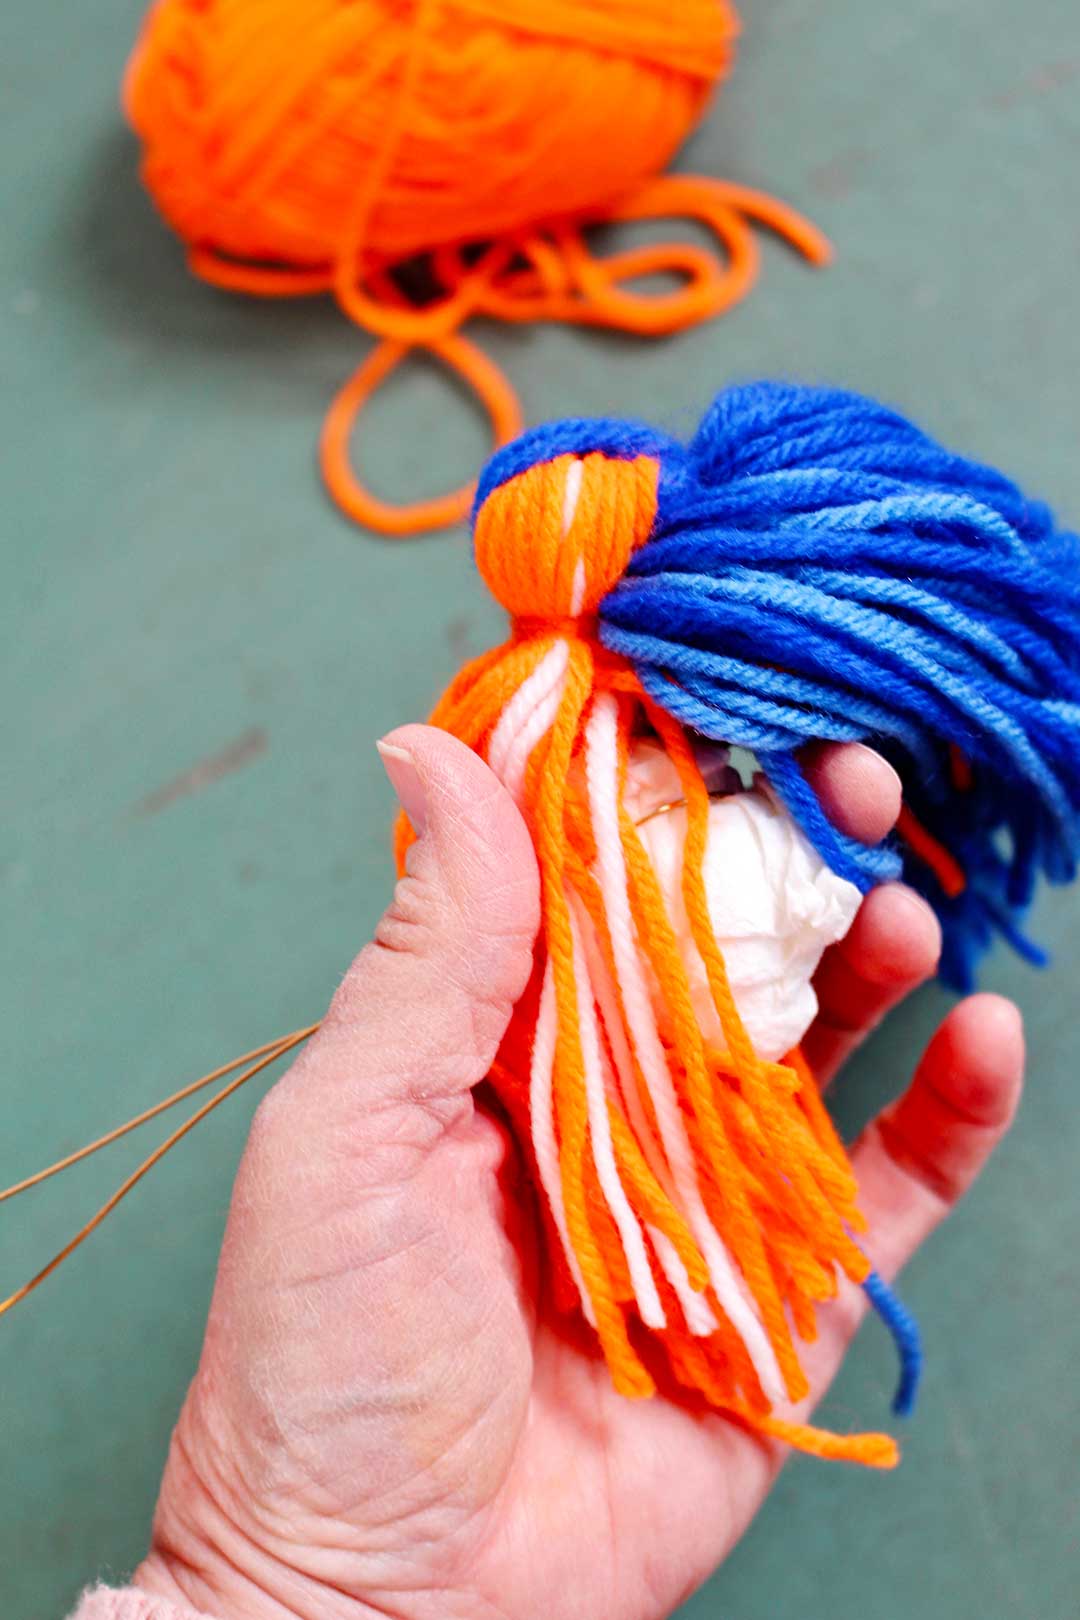 wrapping orange yarn around a ball of paper towels.